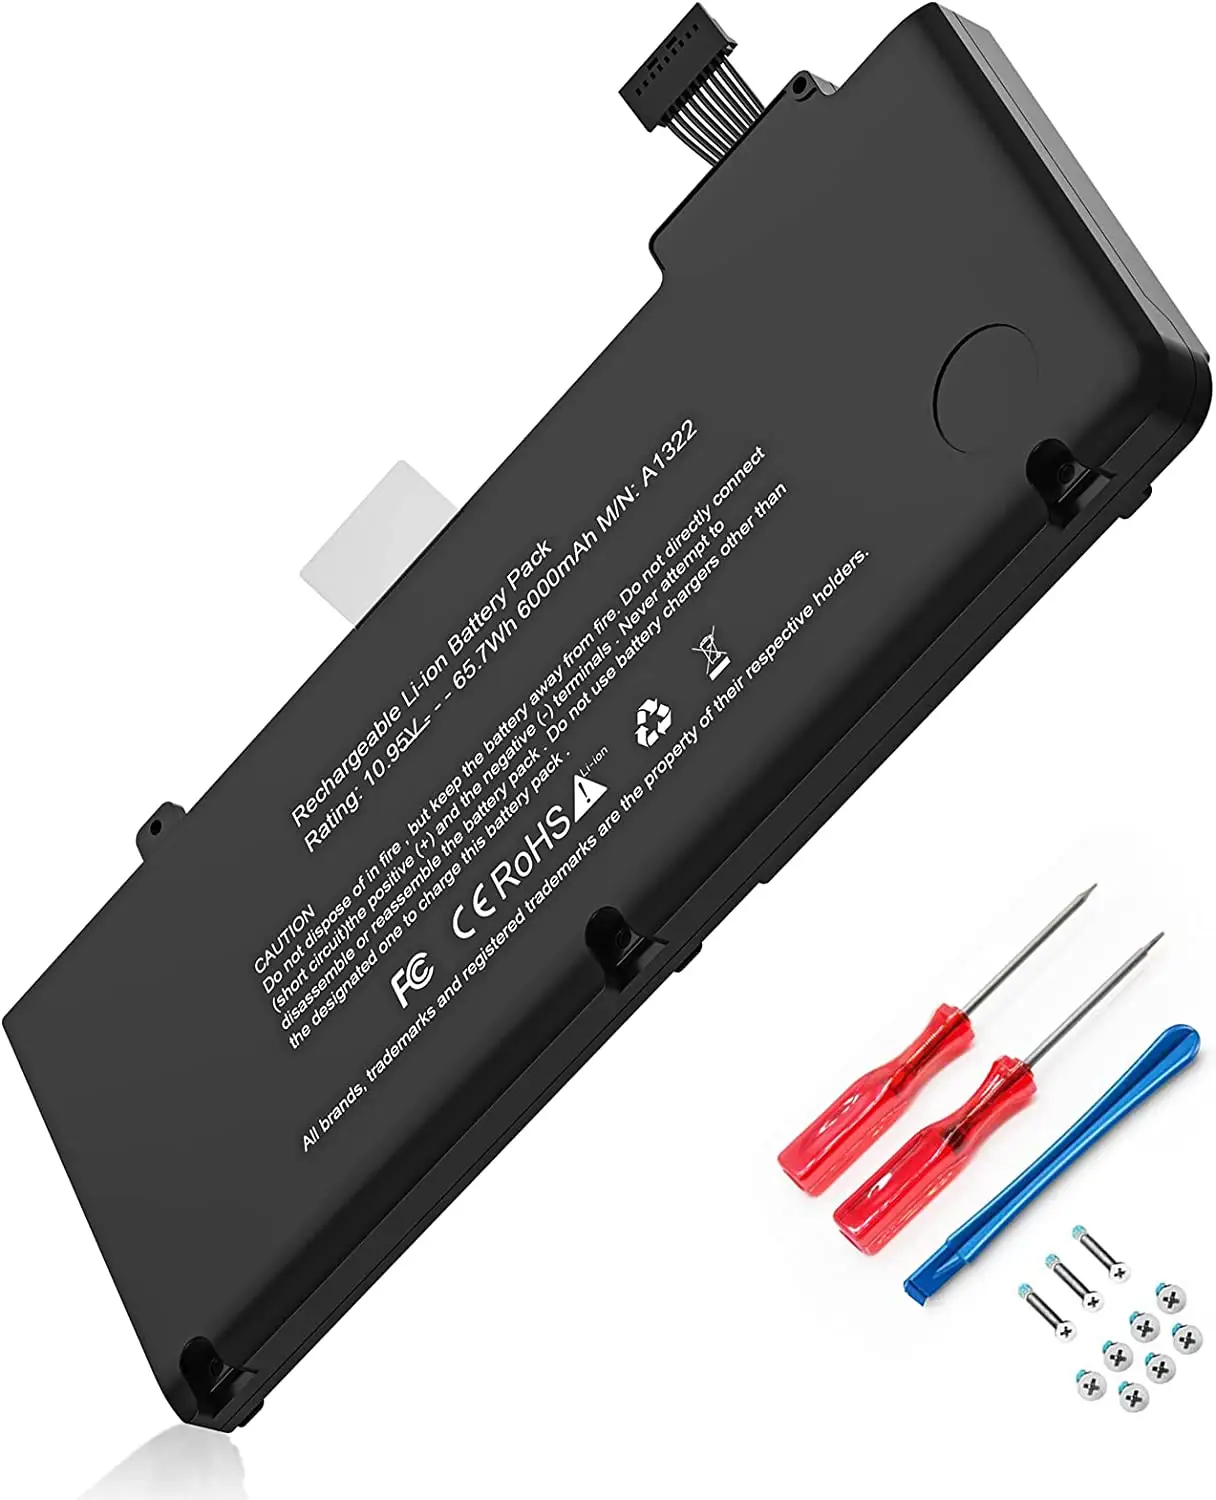 High quality replacement Battery For MacBook Pro 13 inch A1322 A1278 2009-2012 MB990 laptop battery